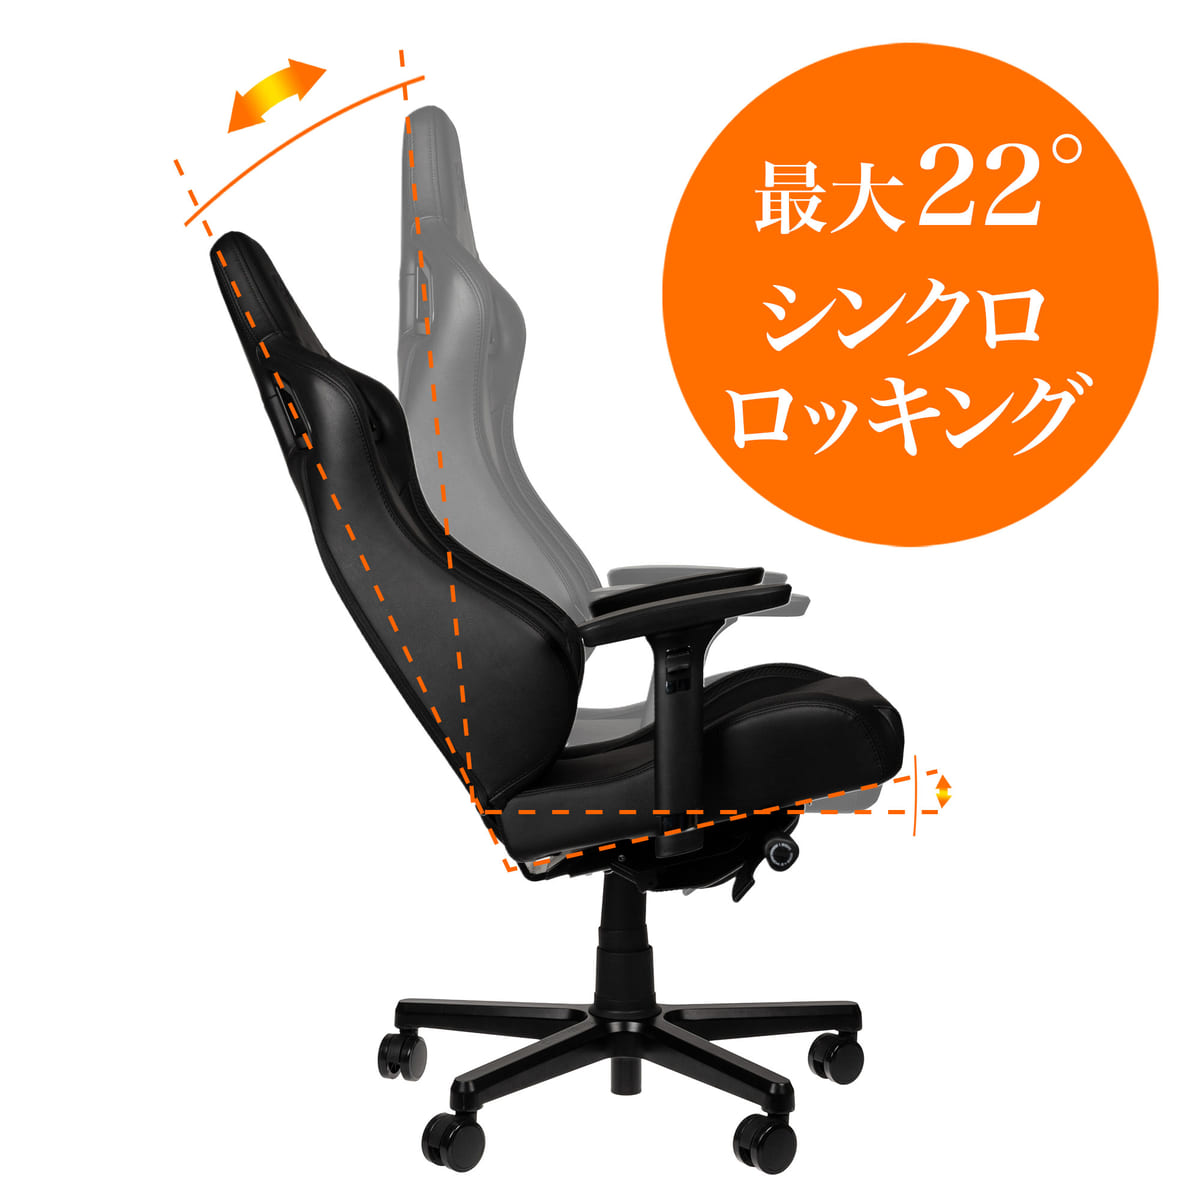 noblechairs(ノーブルチェアーズ)「EPIC COMPACT」１０